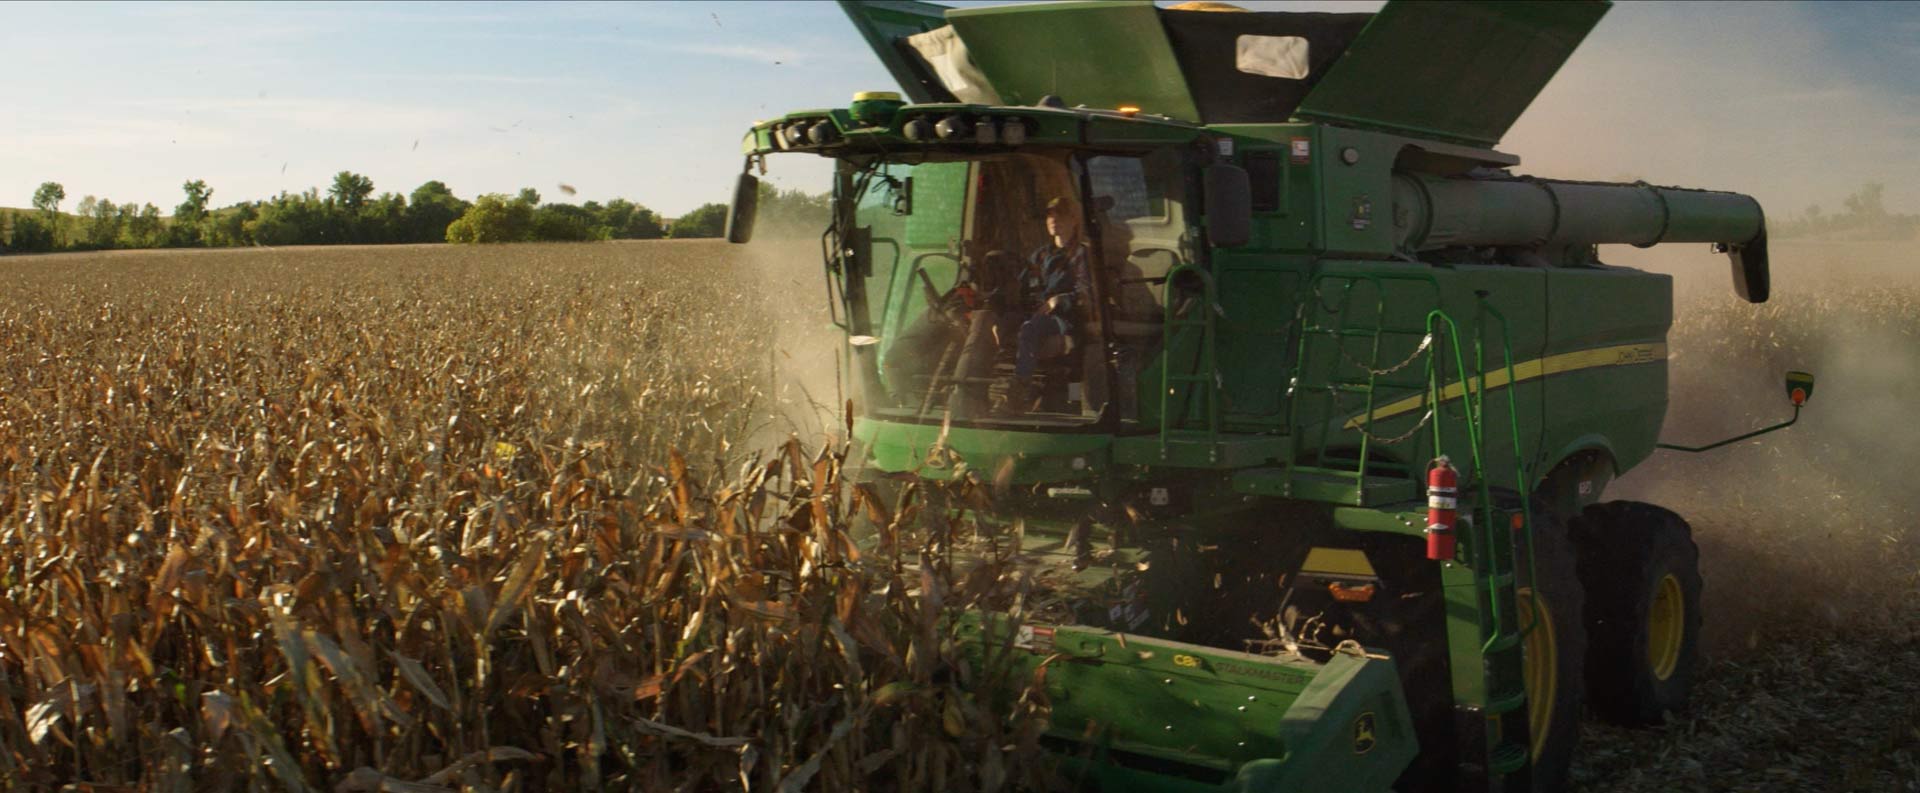 Exterior view of a harvesting combine driven by young woman